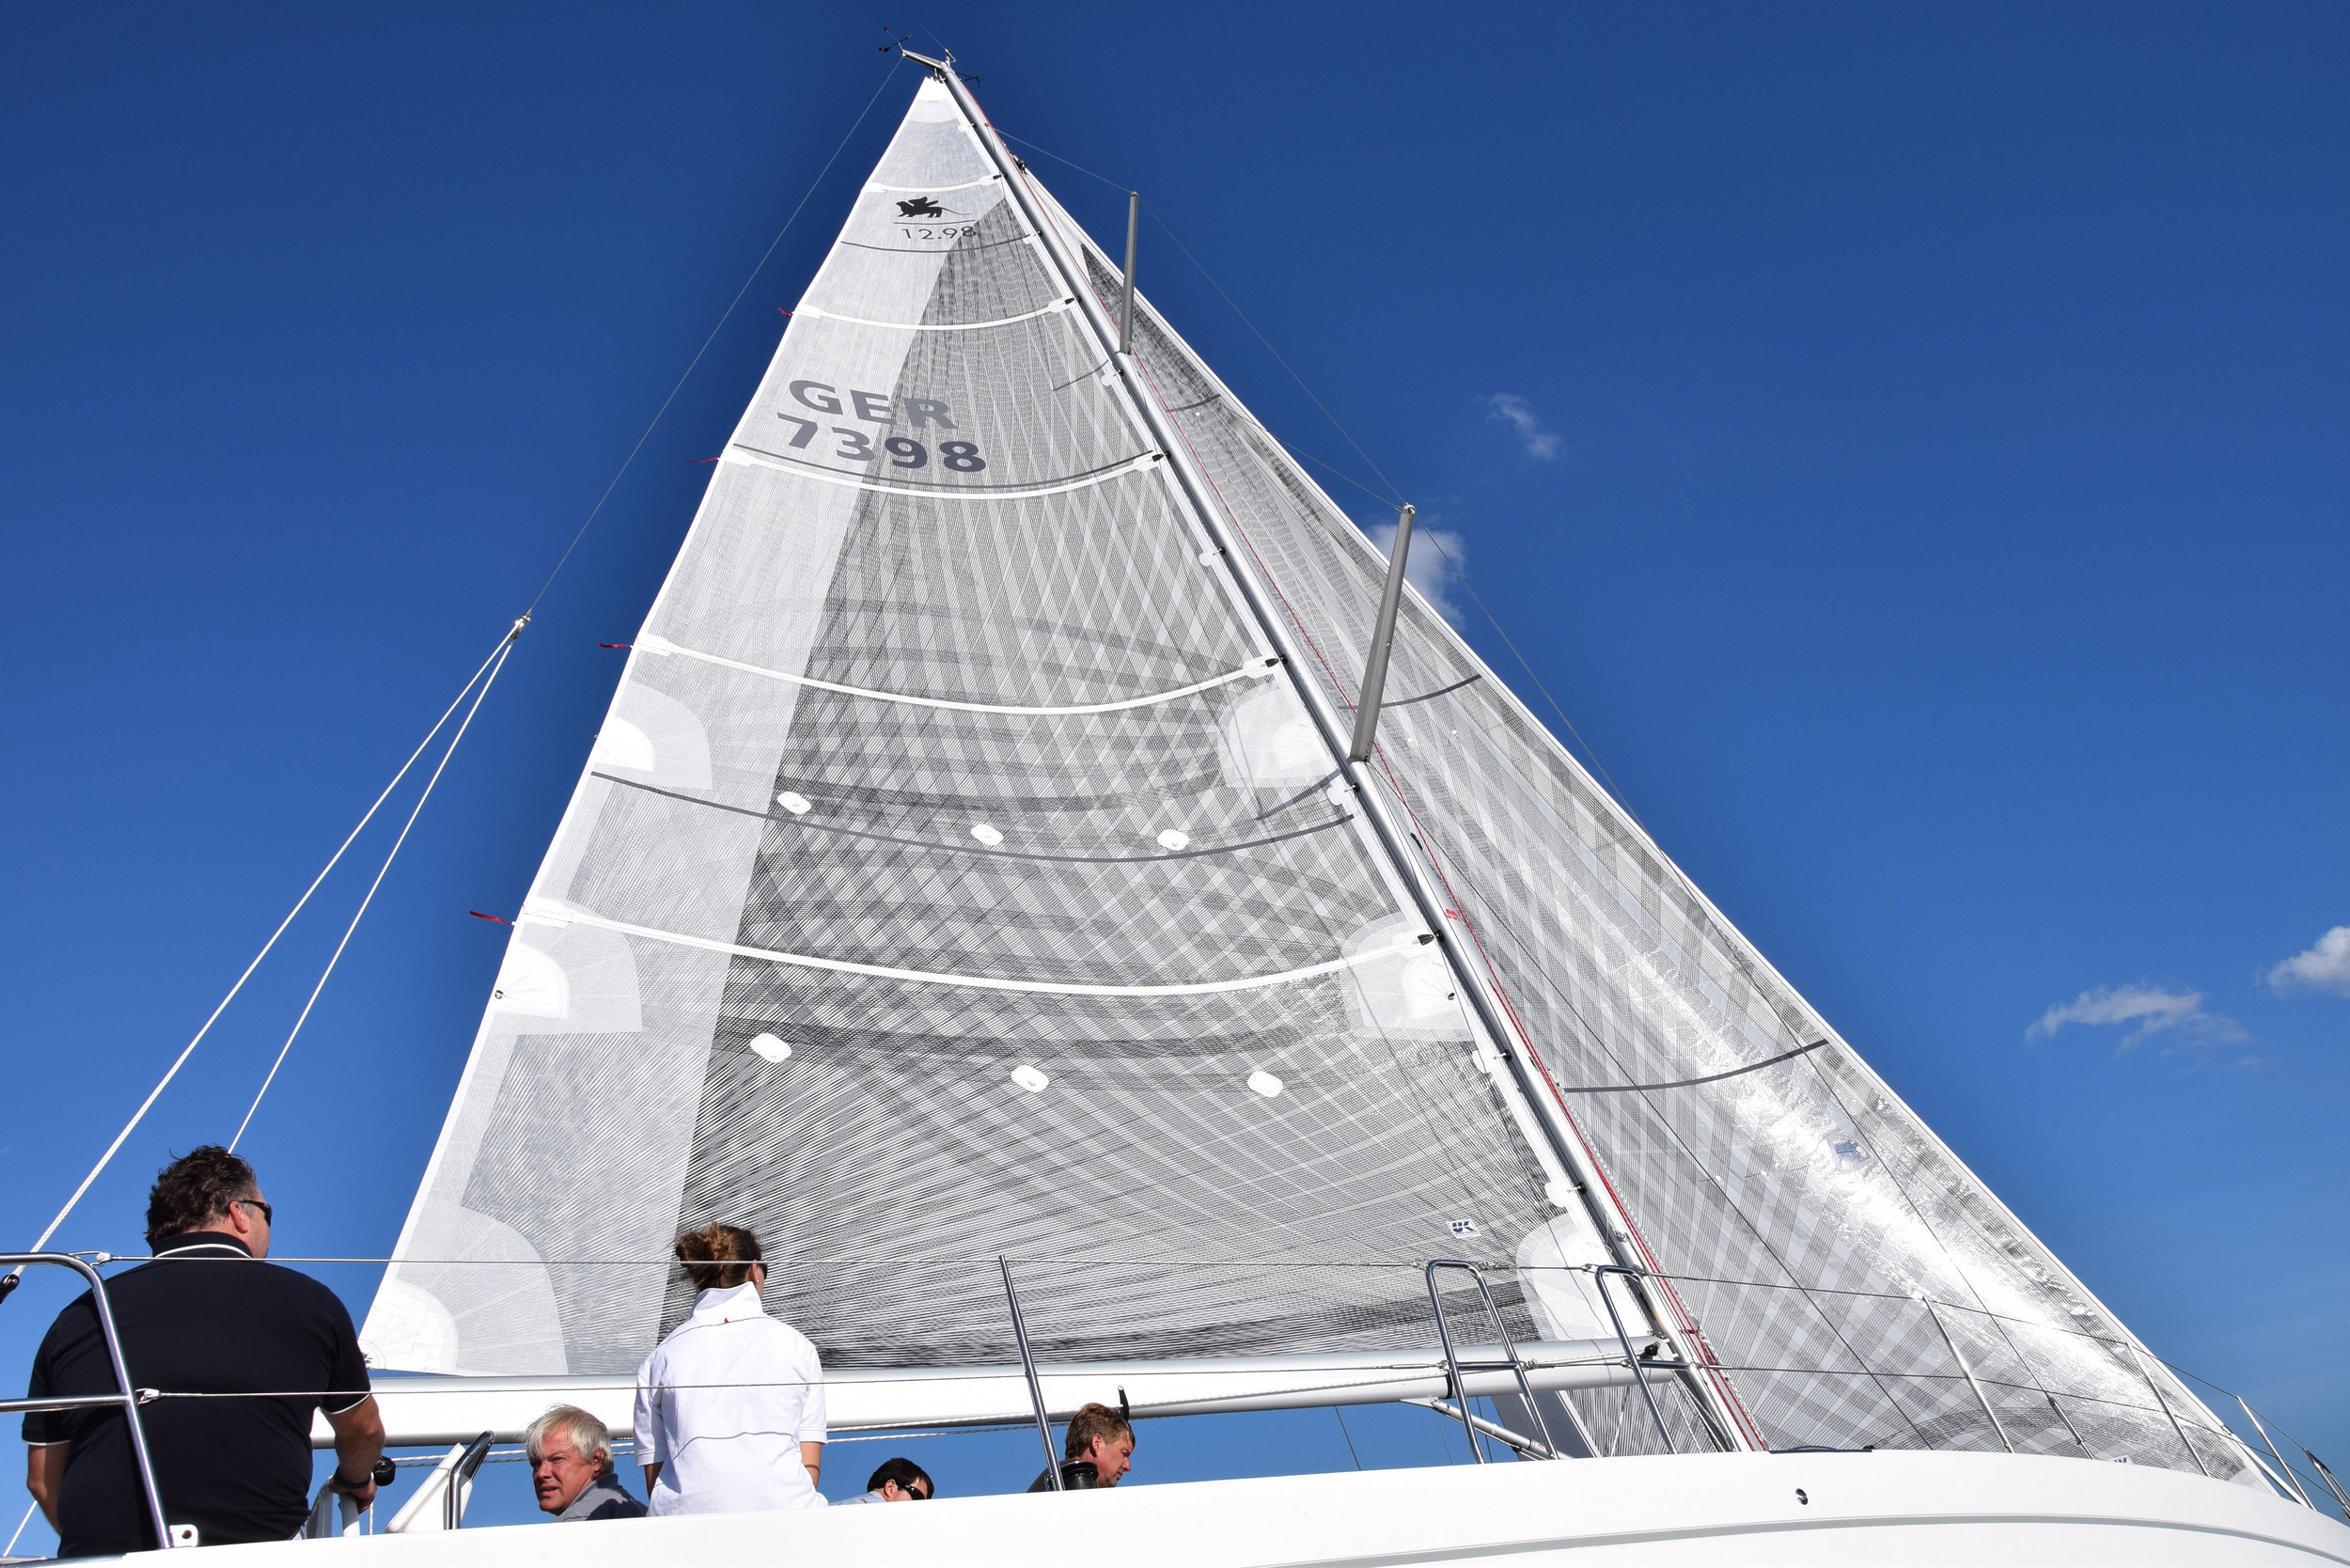 A full batten cruising mainsail with two rows of reefs made with carbon X-Drive. Notice the extra taffeta layer on the leech that increases longevity to prevent hinging damage induced by luffing.